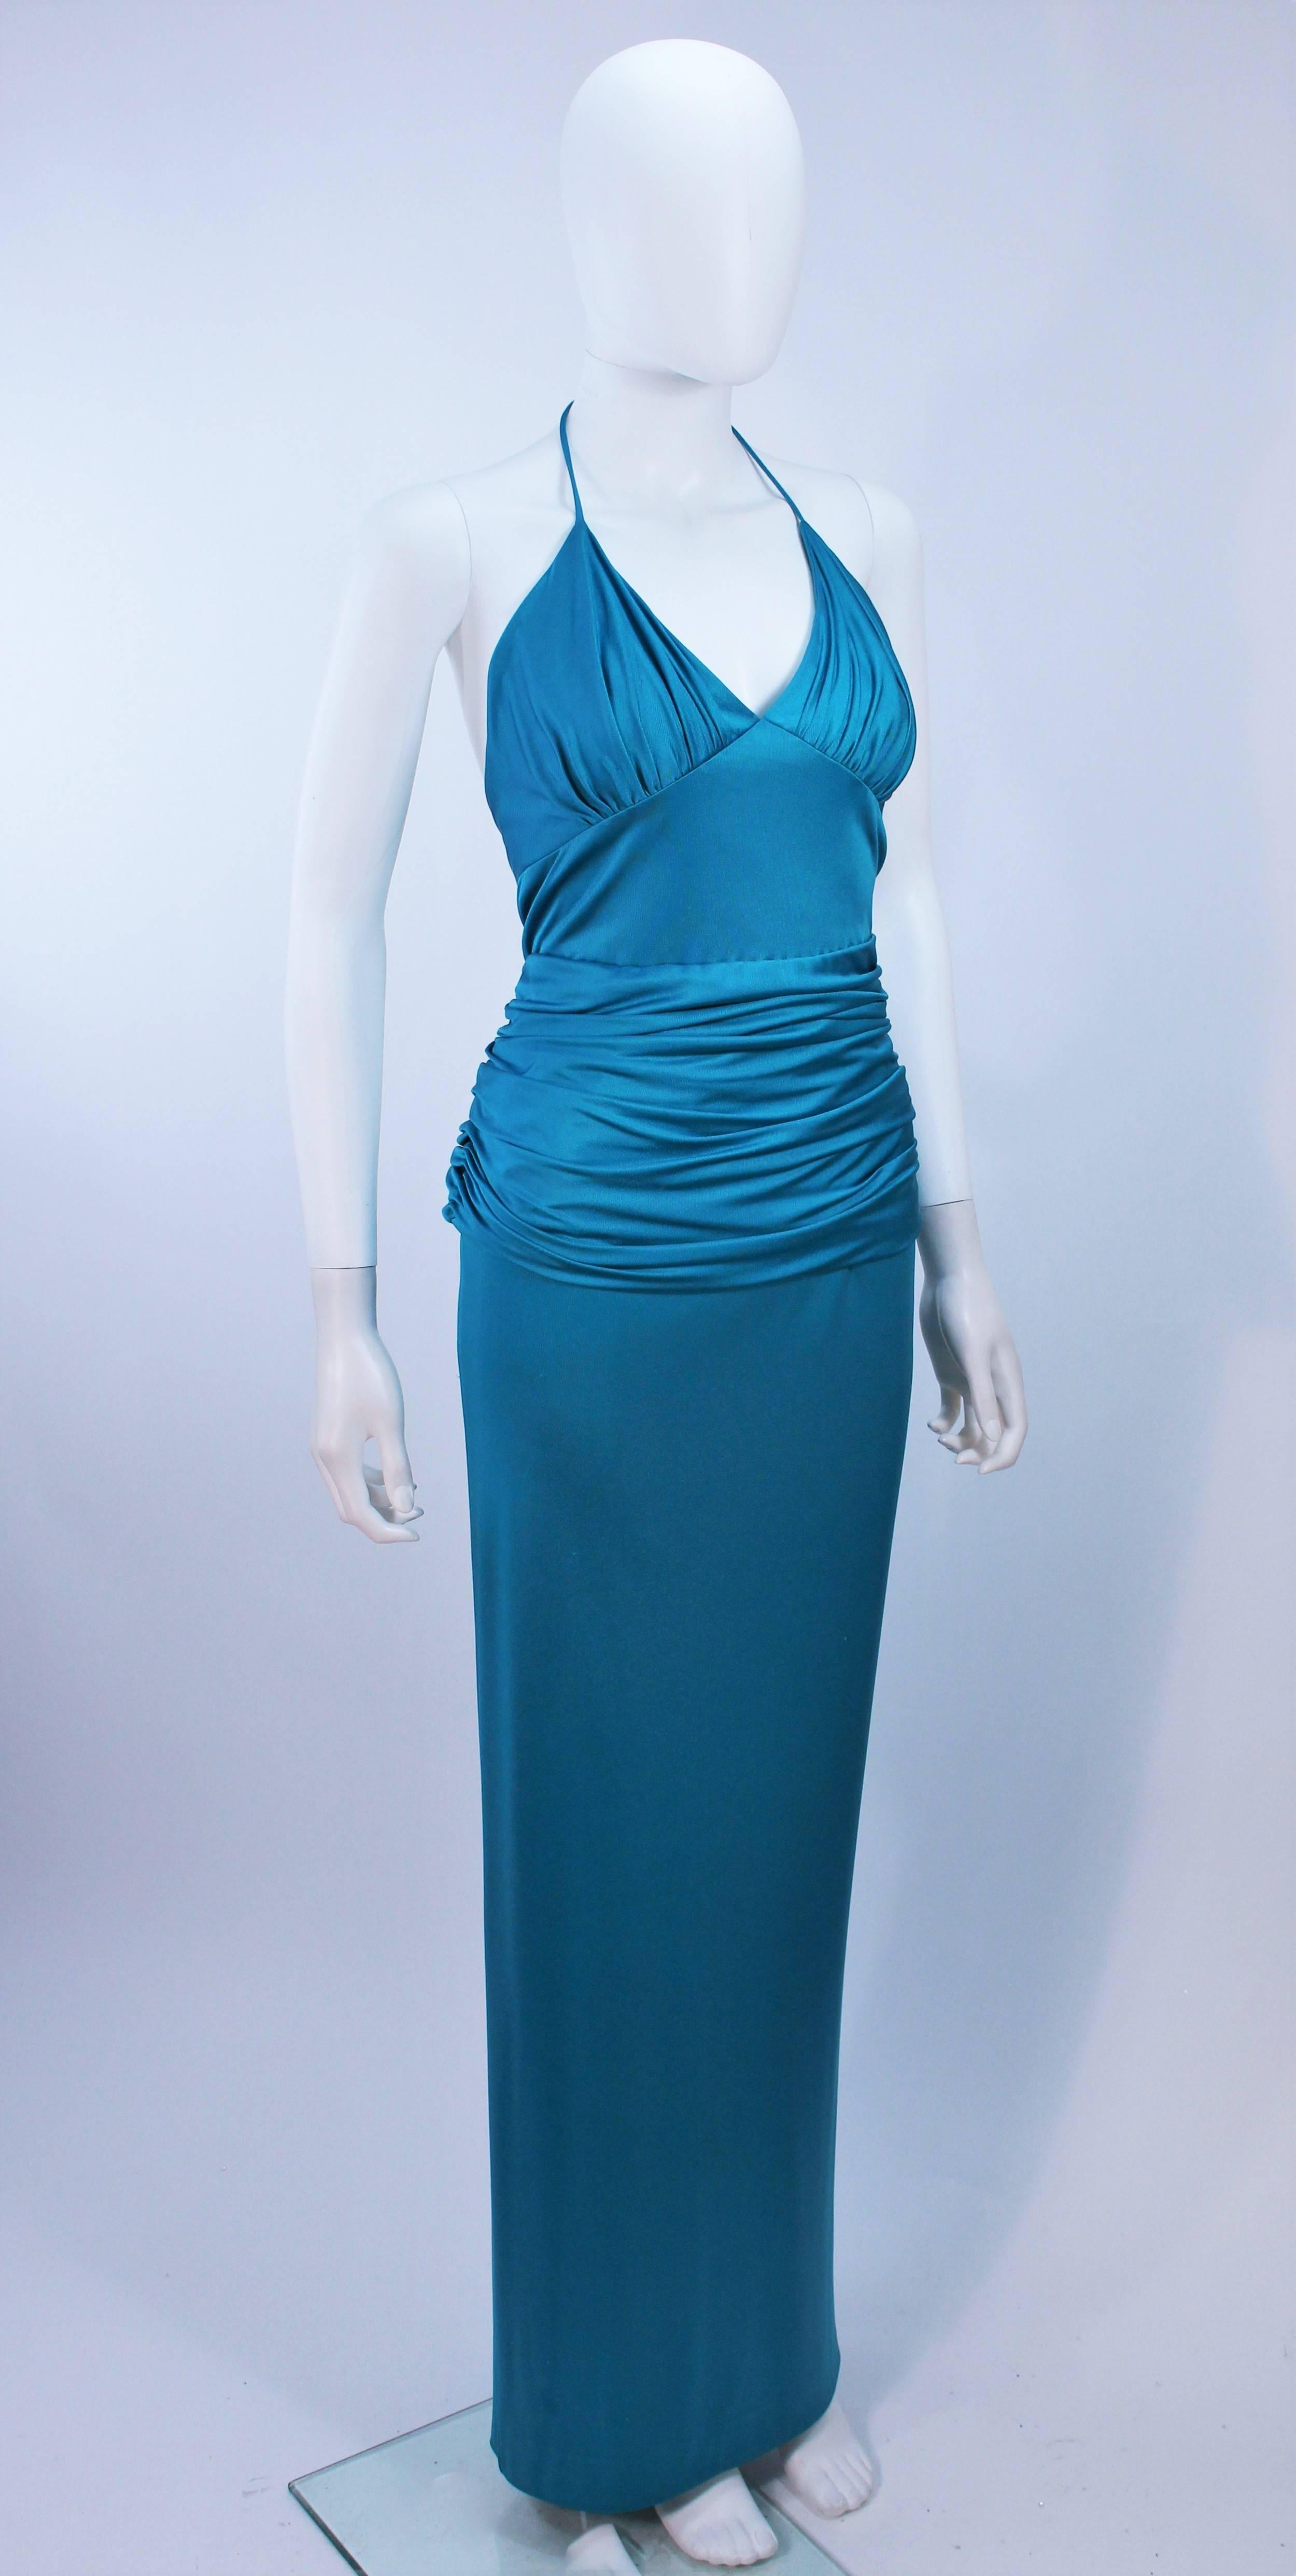 Women's ELIZABETH MASON COUTURE Turquoise Silk Jersey Halter Gown Made to Order For Sale